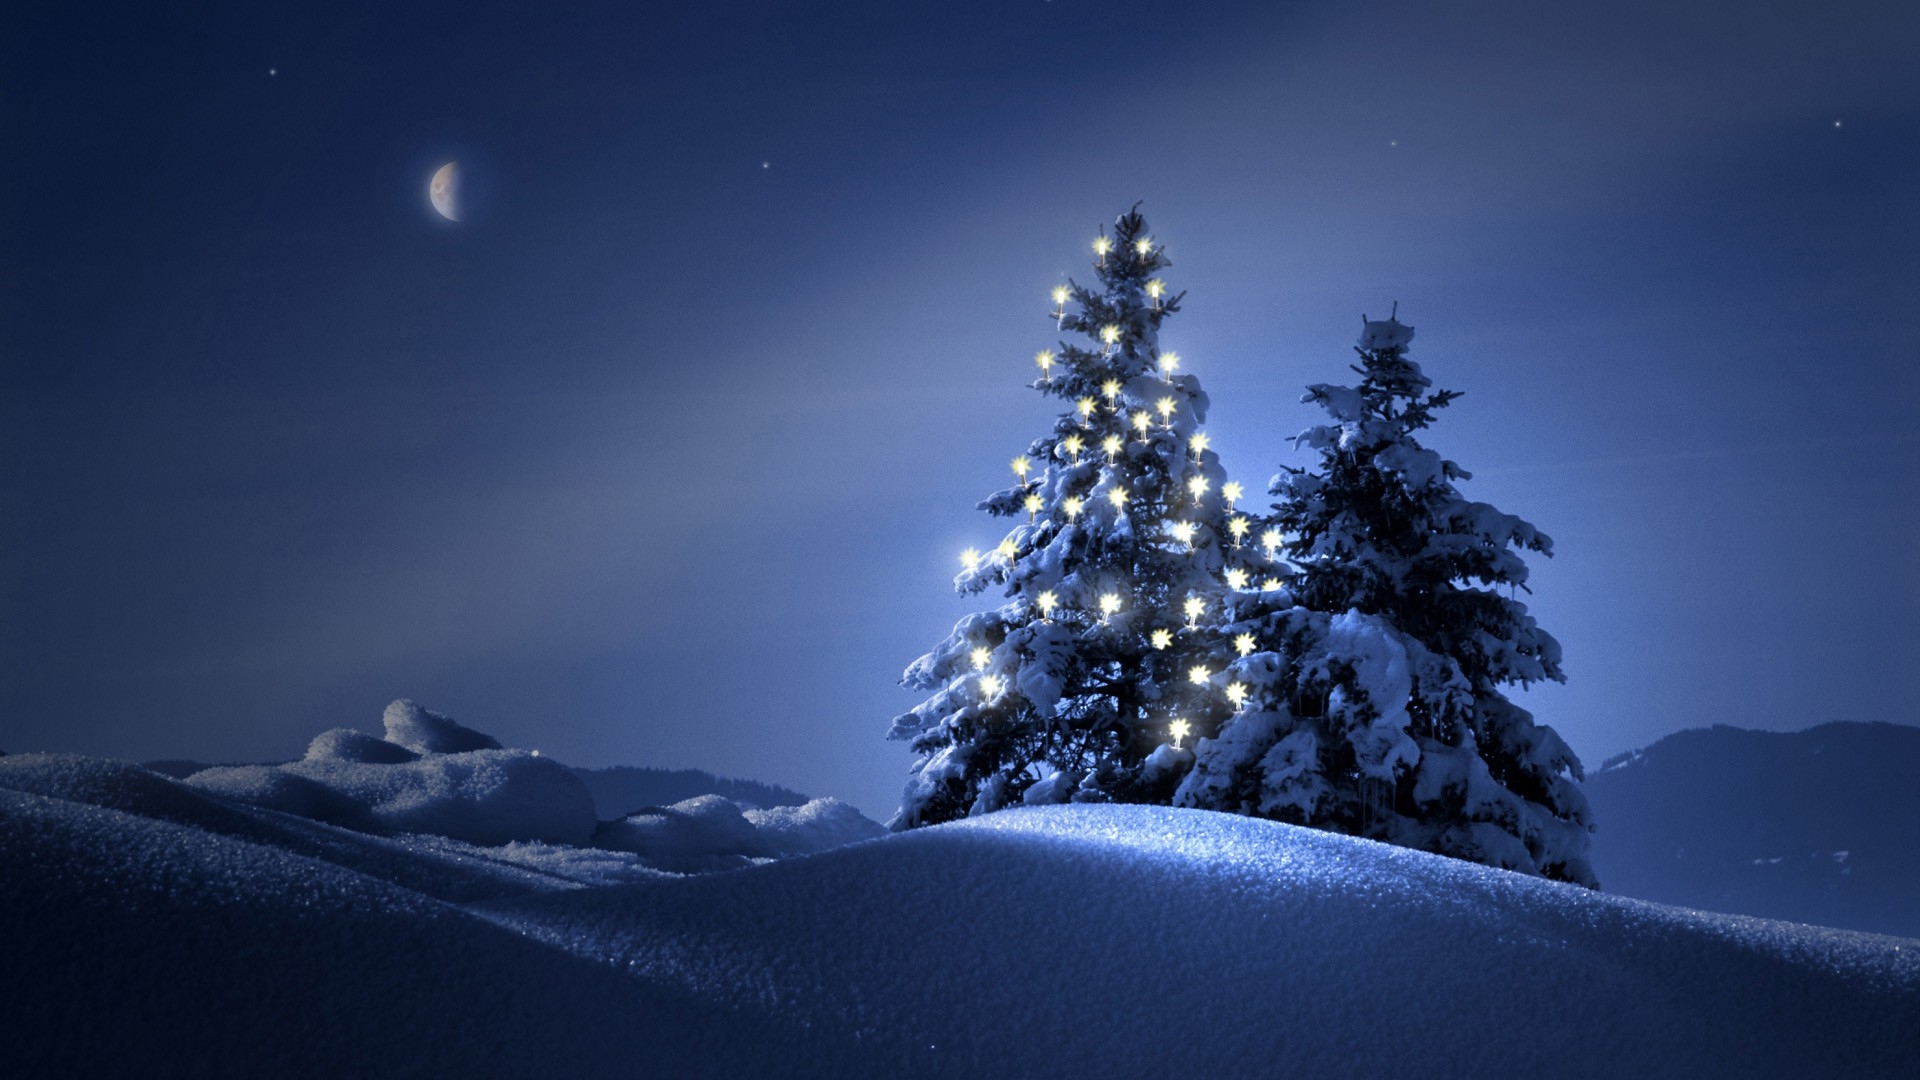 Clearly Christmas Tree At Night Wallpapers HD / Desktop and Mobile